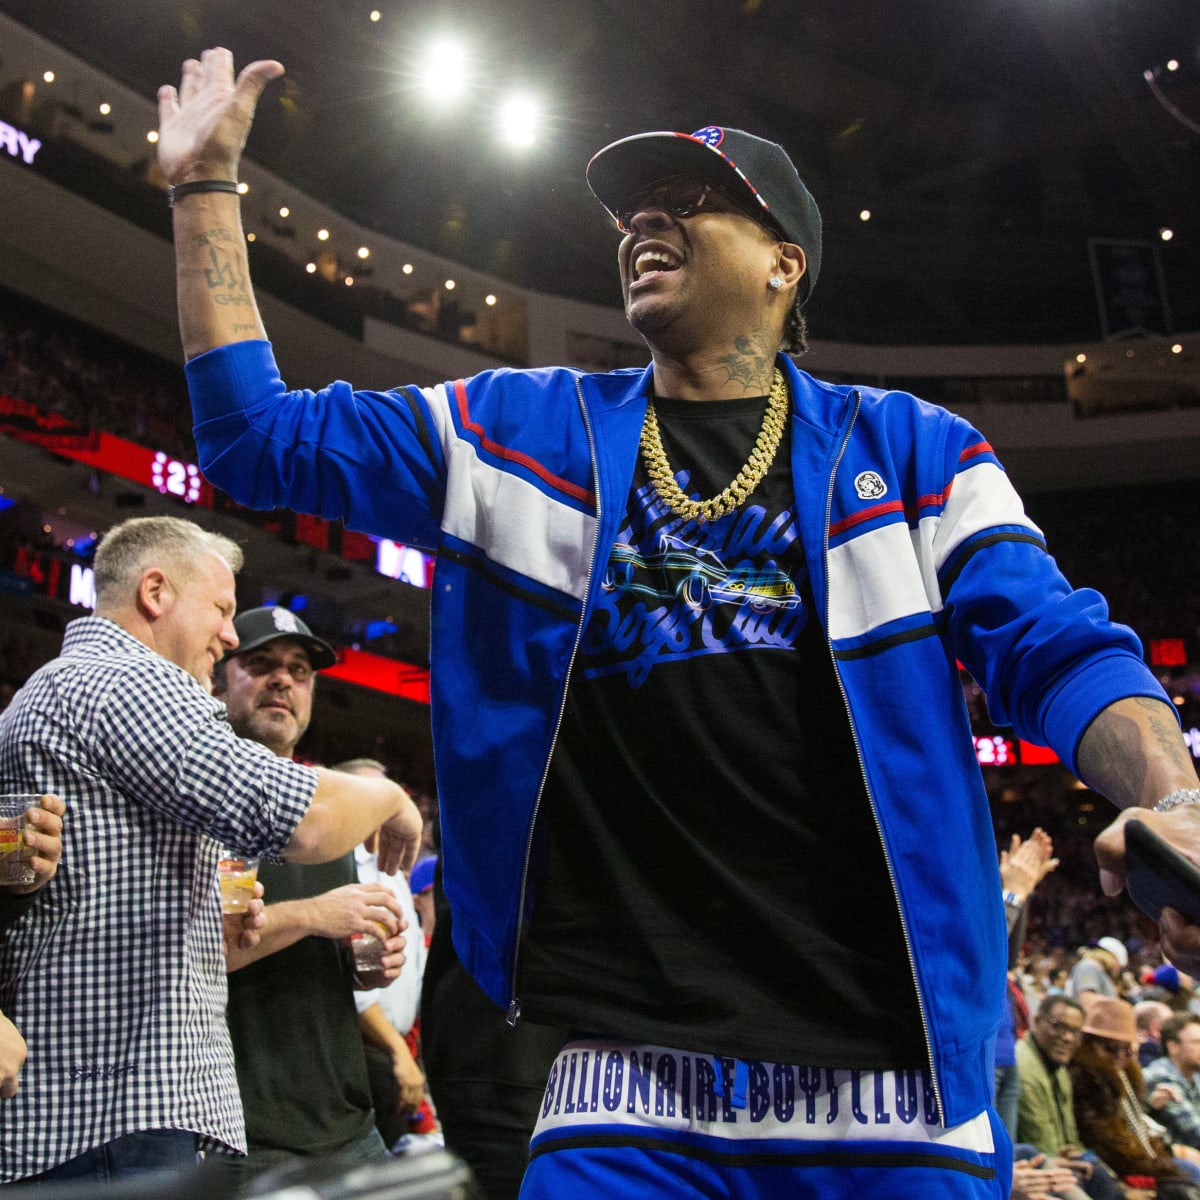 Eagles Star Pays Ultimate Respect to Sixers Legend Allen Iverson